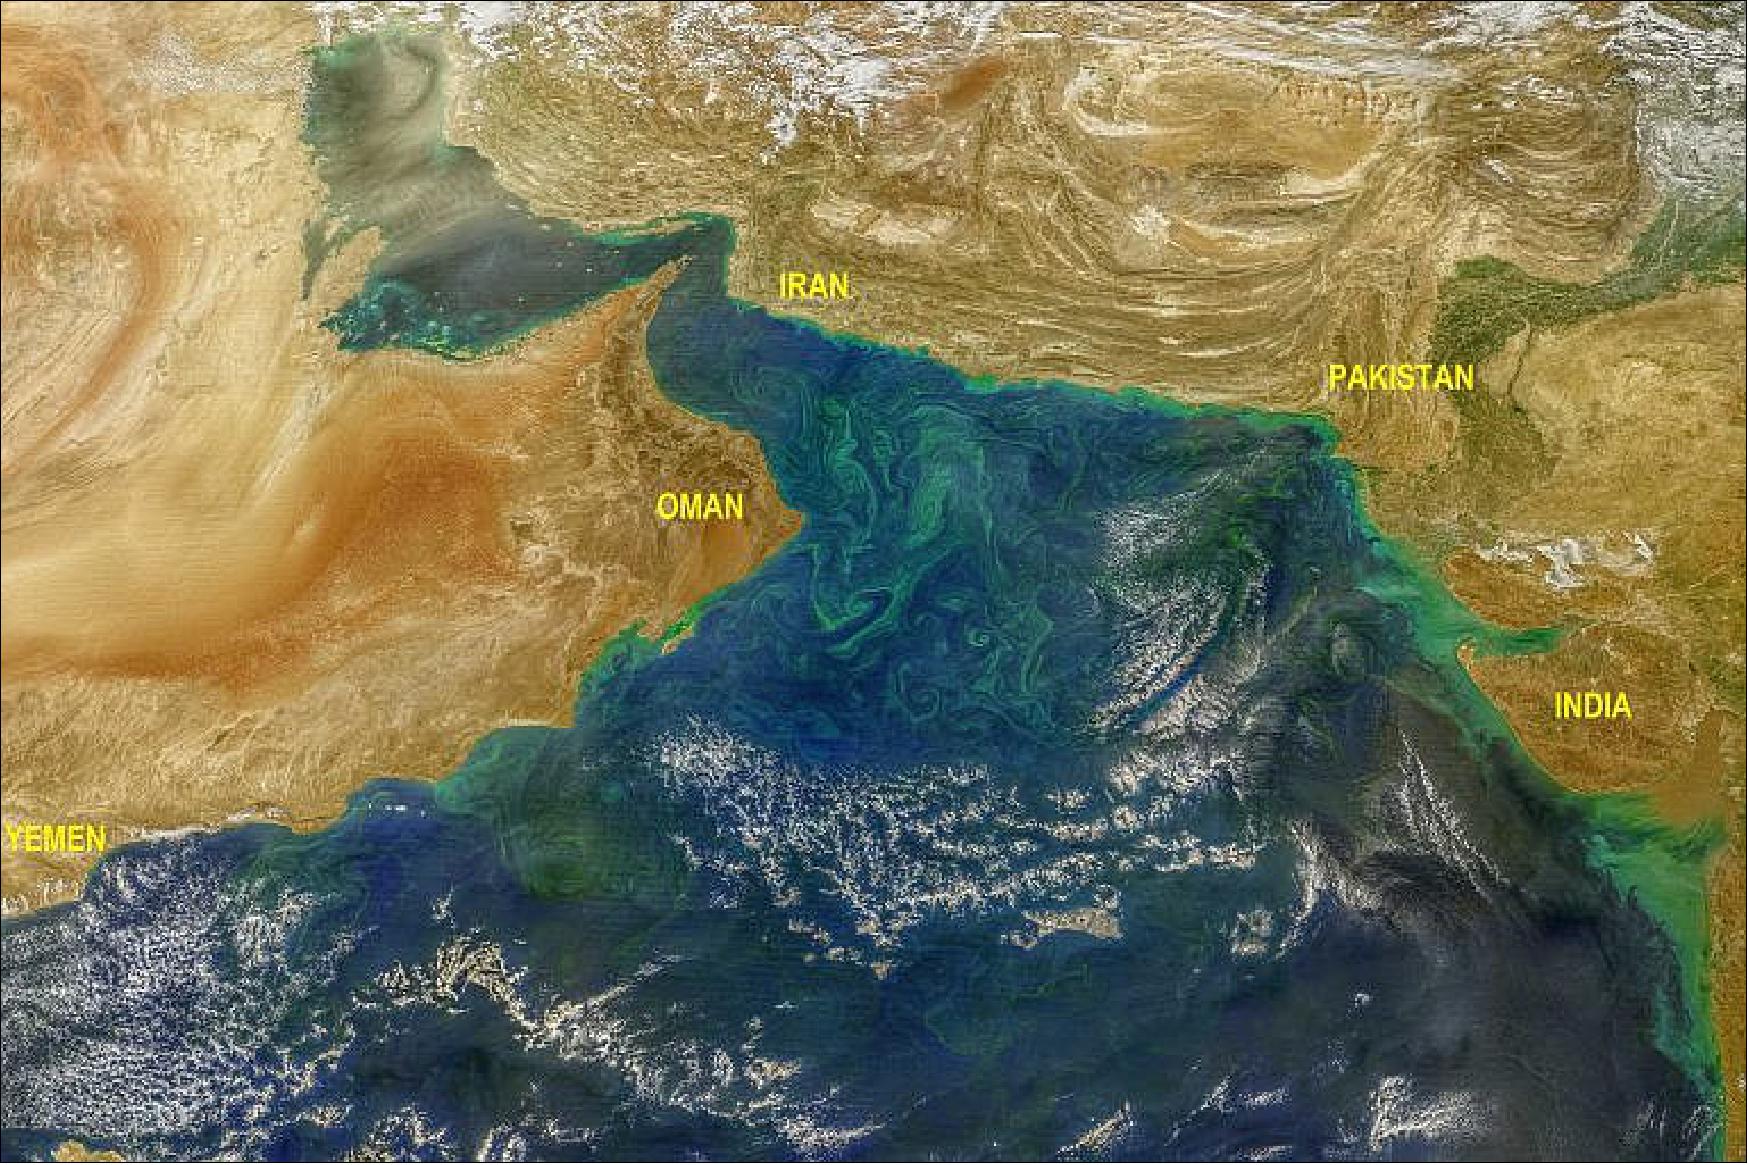 Figure 81: Noctiluca blooms in the Arabian Sea, as seen from space (image credit: NASA, Norman Kuring)